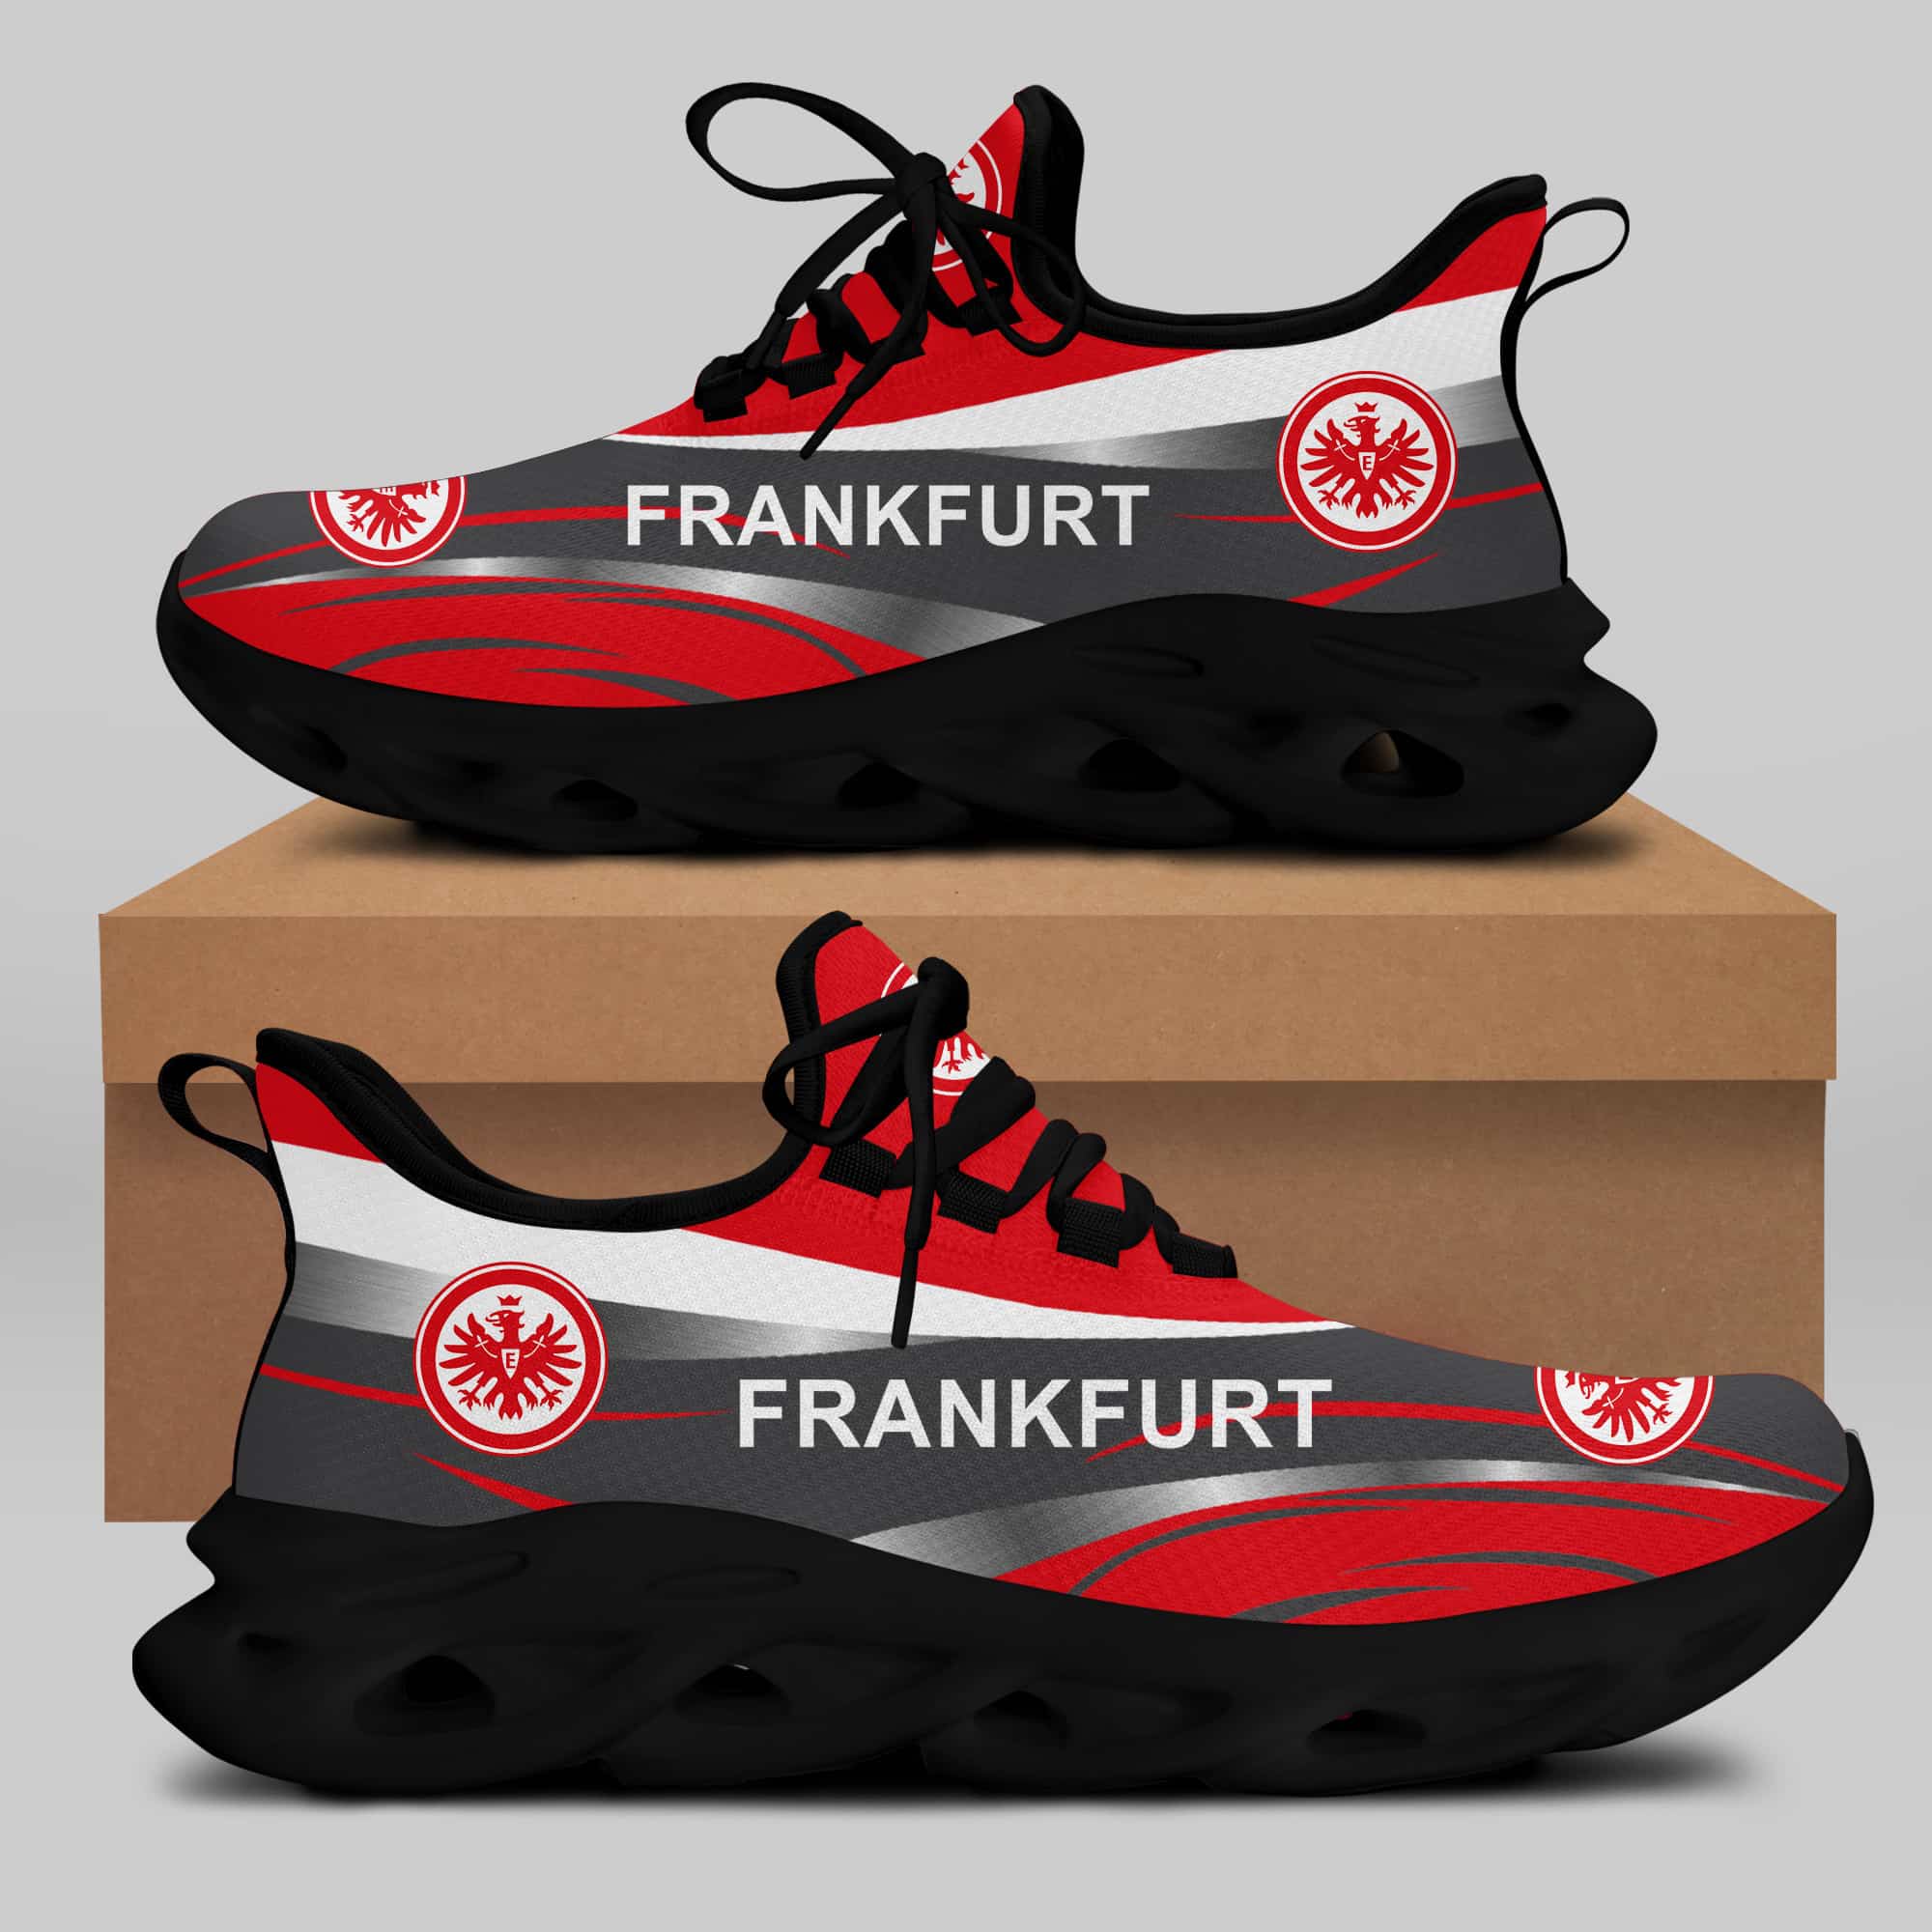 Eintracht Frankfurt Running Shoes Max Soul Shoes Sneakers Ver 32 2